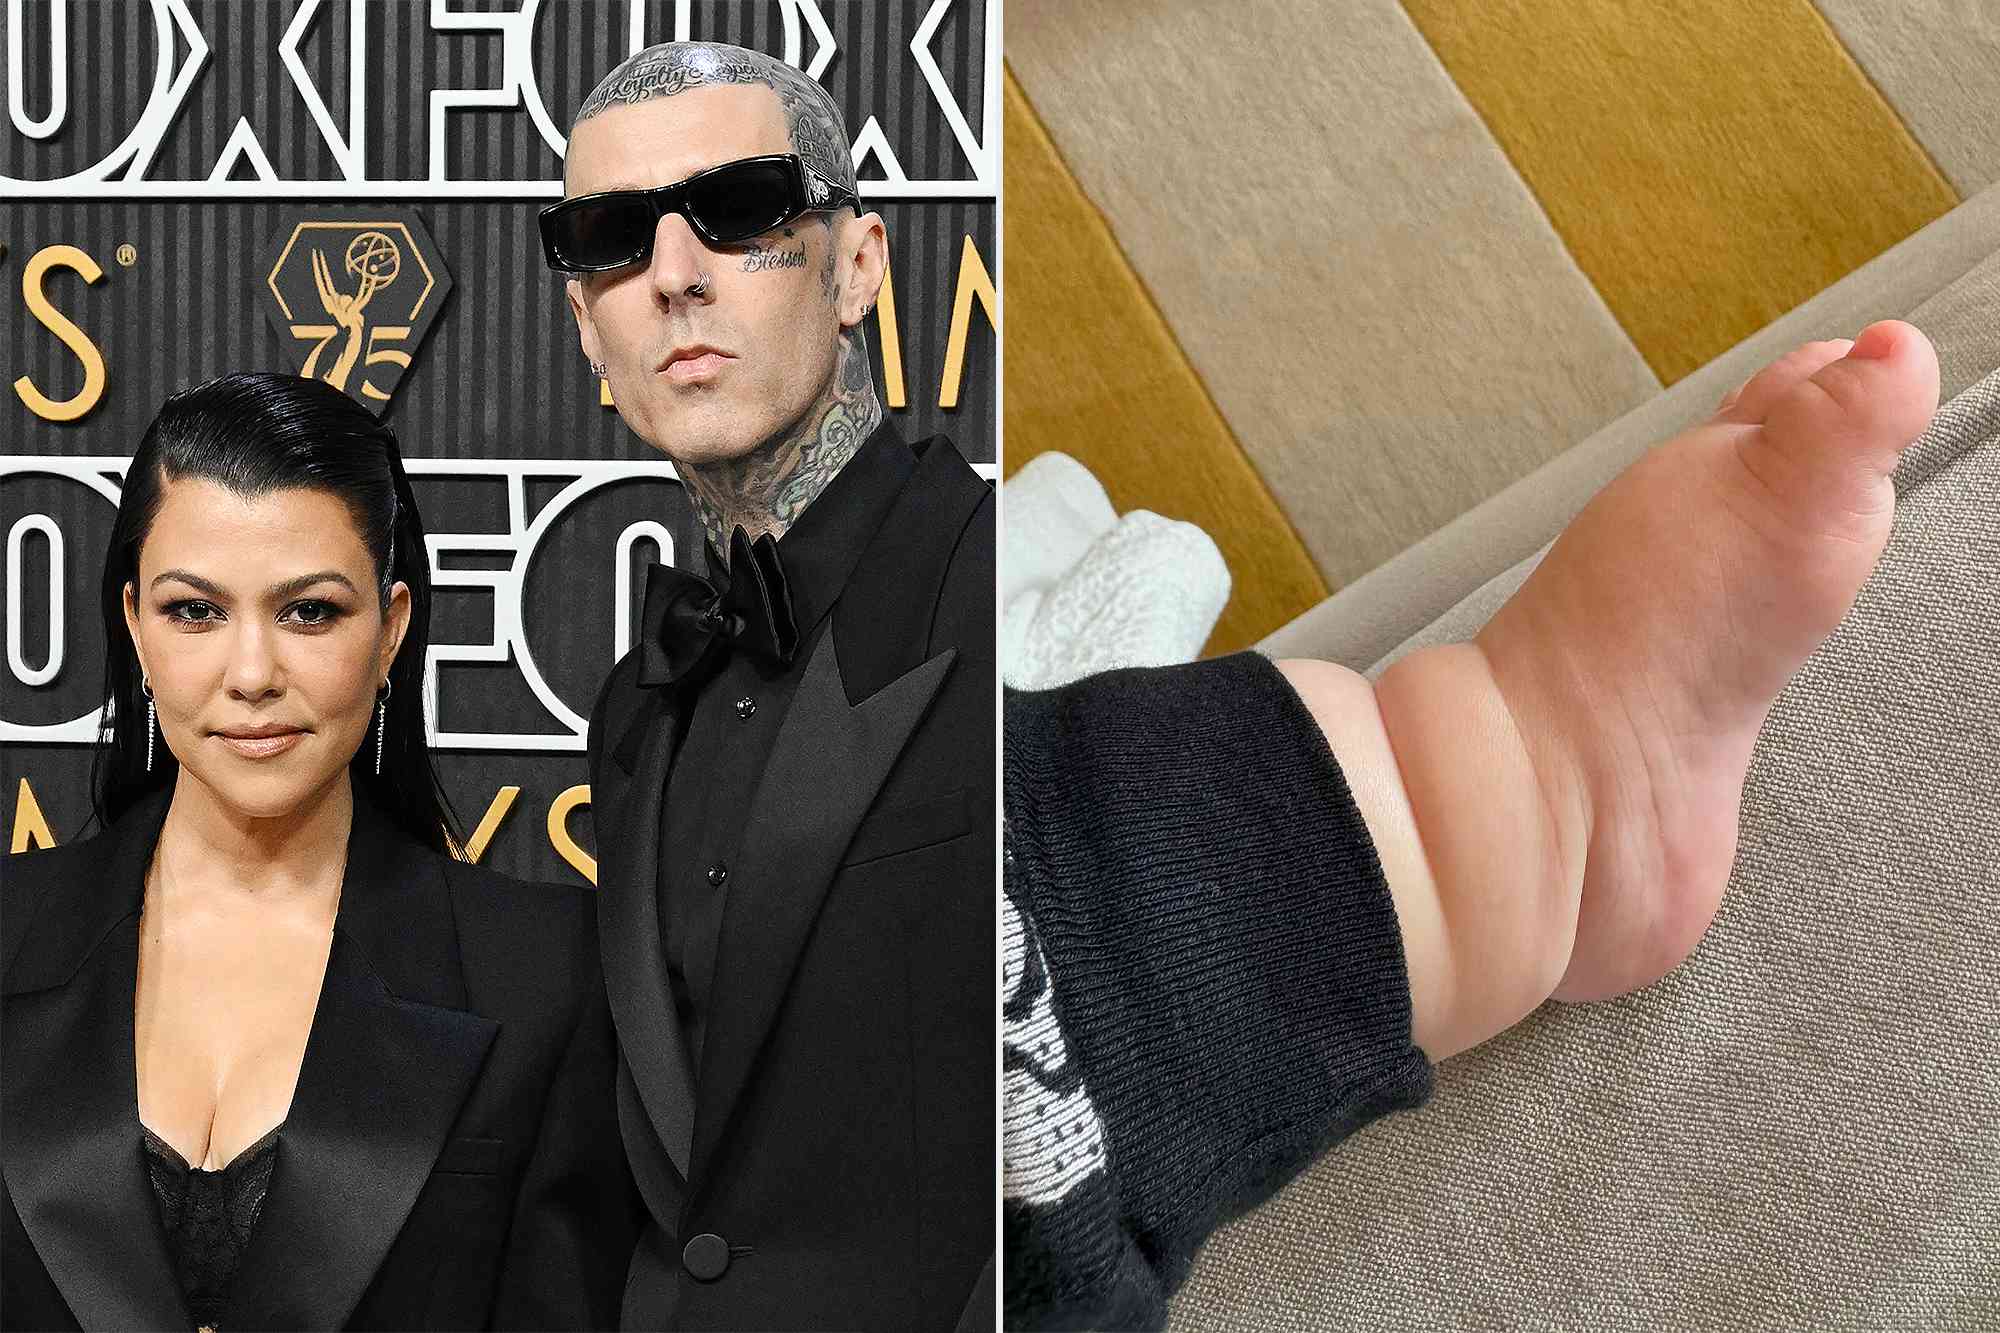 Kourtney Kardashian Posts Cute Snap of Baby Rocky’s Foot as She Shares Her ‘Weekend’ with Travis Barker